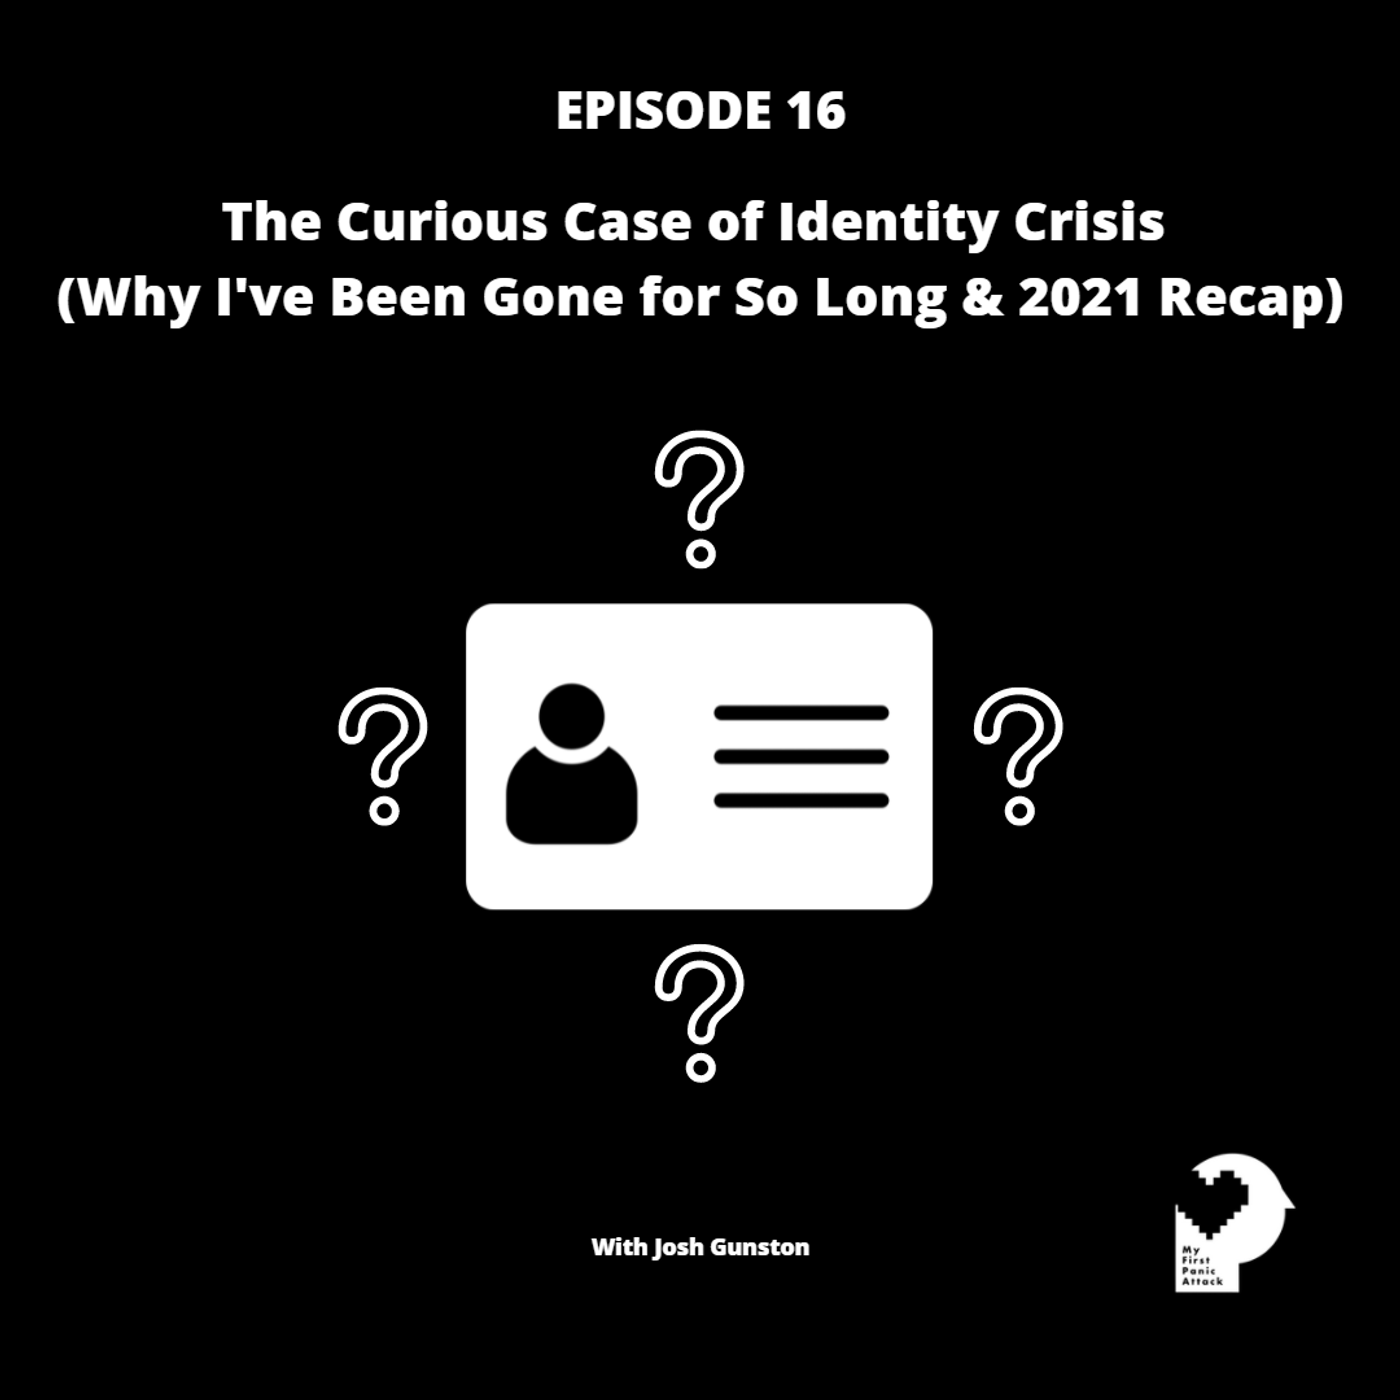 16: The Curious Case of Identity Crisis (Why I've Been Gone for So Long & 2021 Recap)